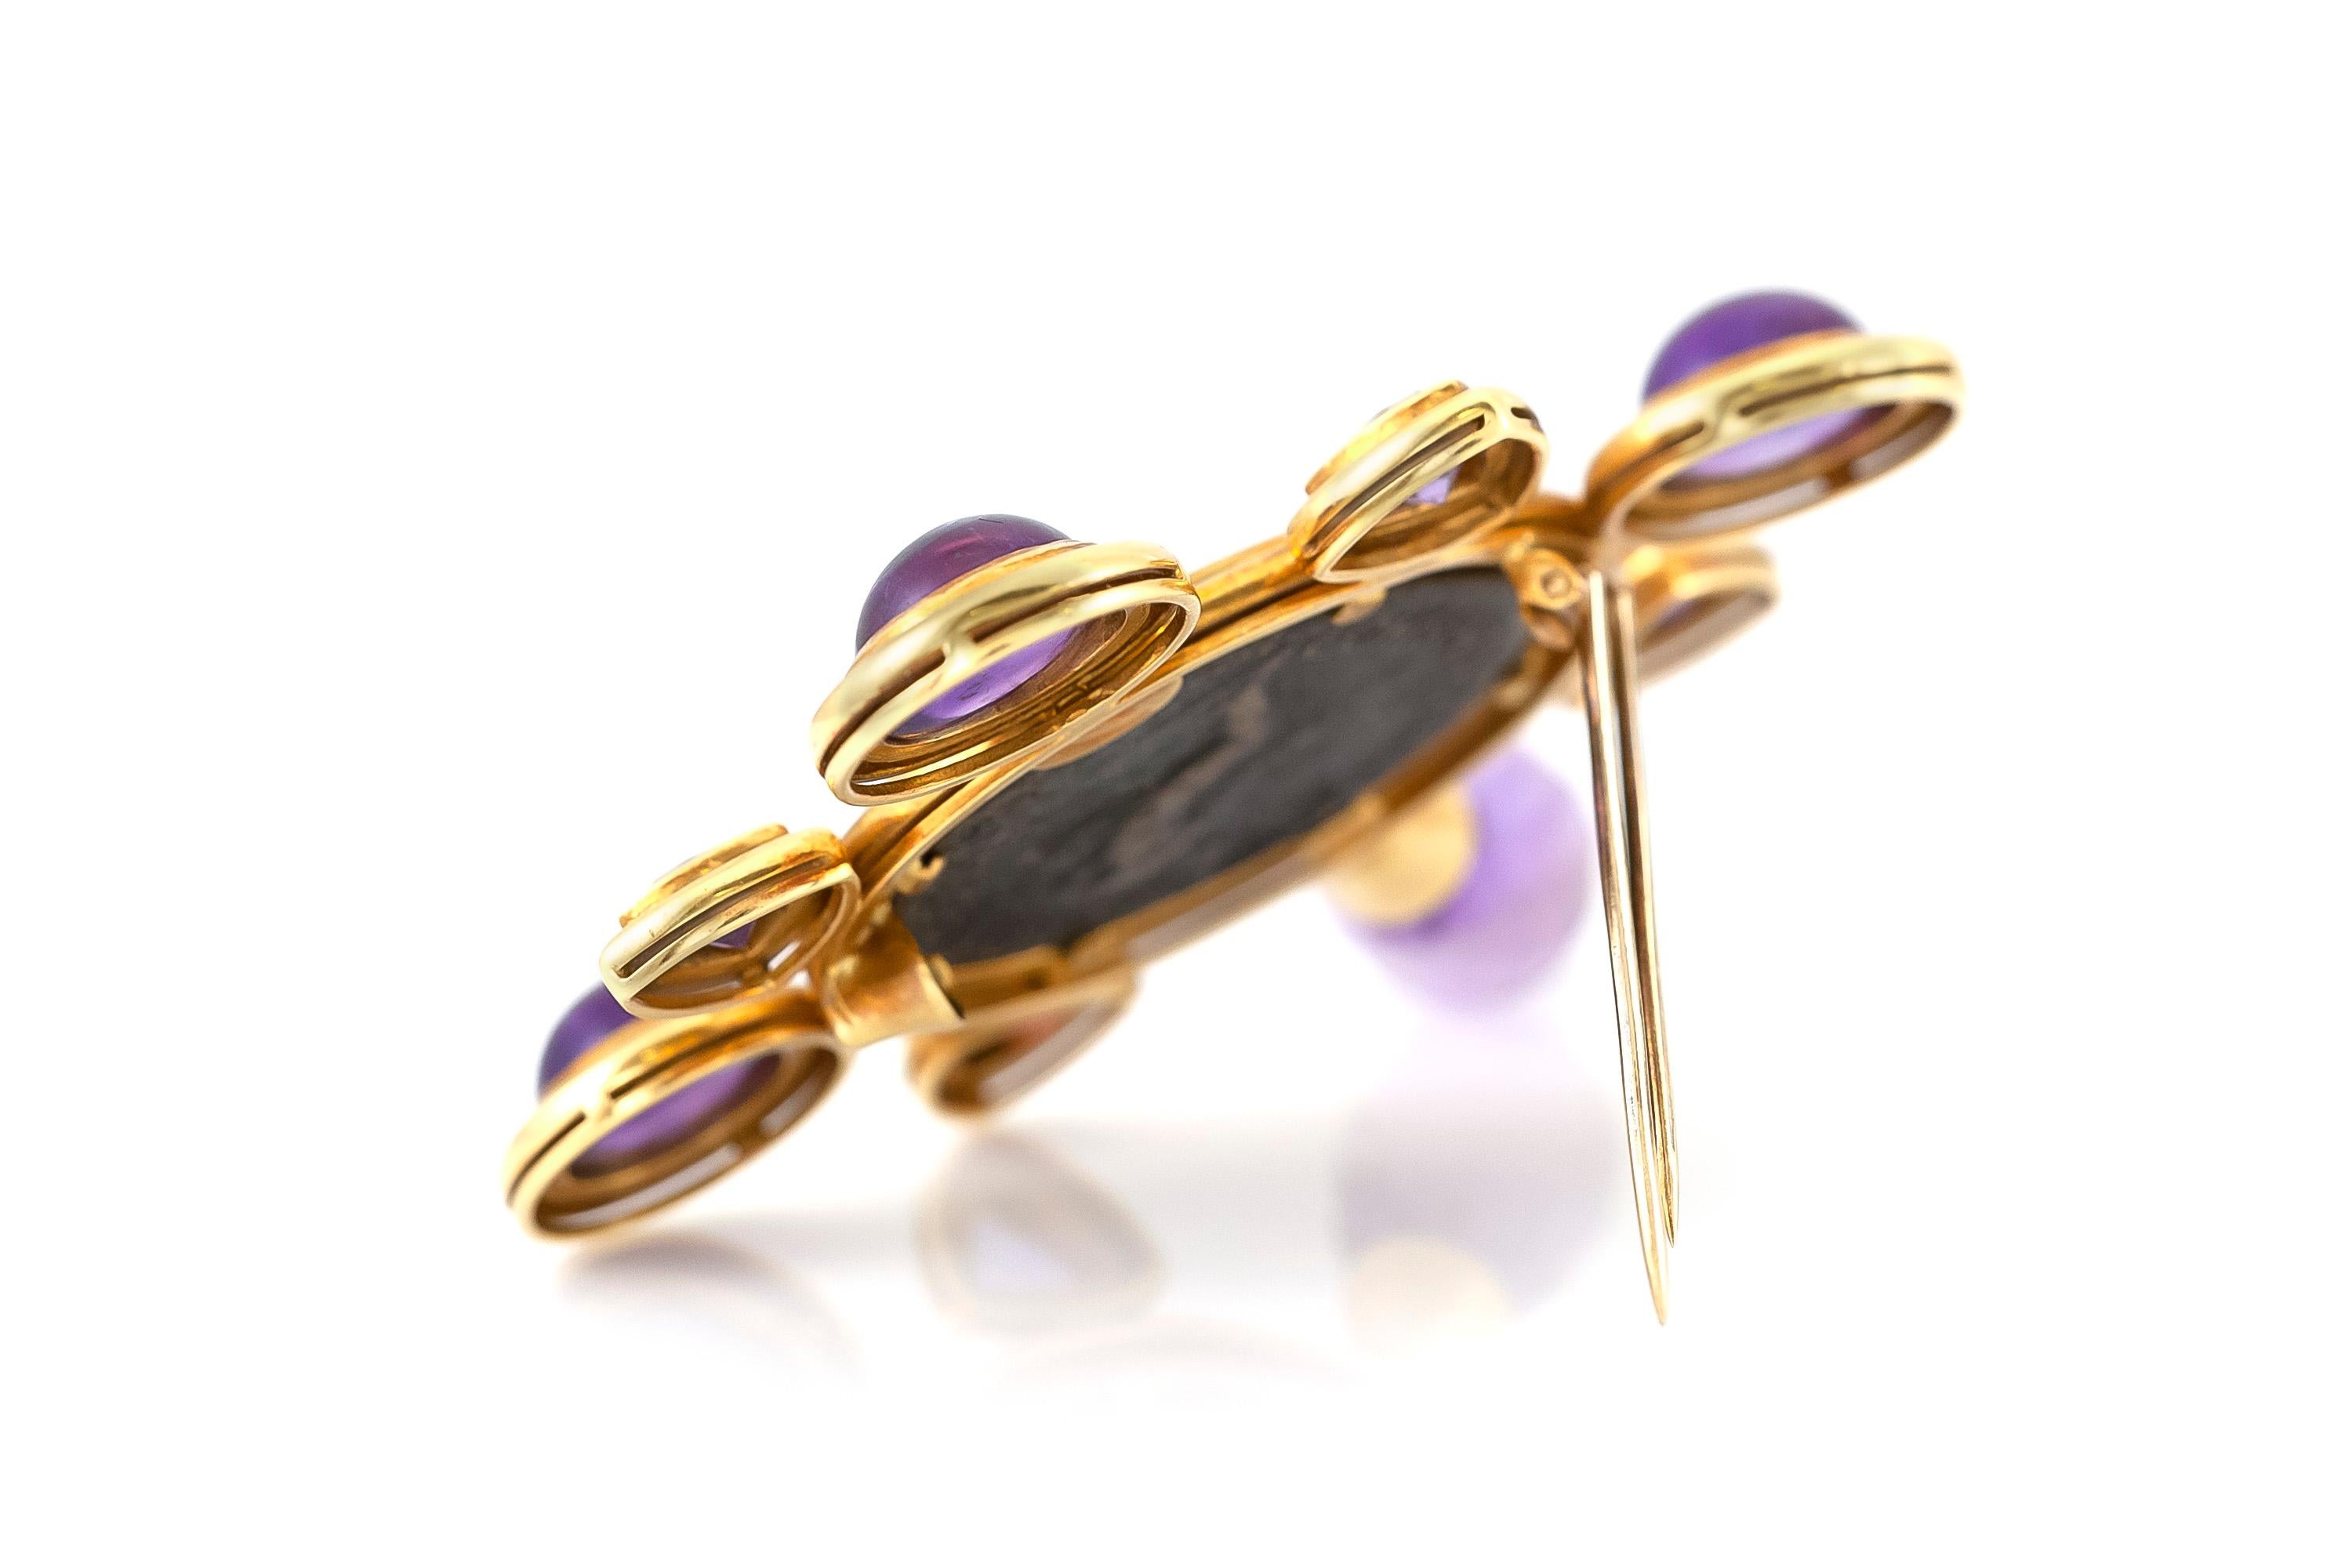 The pin is finely crafted in 18k yellow gold with amethyst around in different sizes .
The pin weighing approximately total of 29.7 dwt.
Circa 1920.